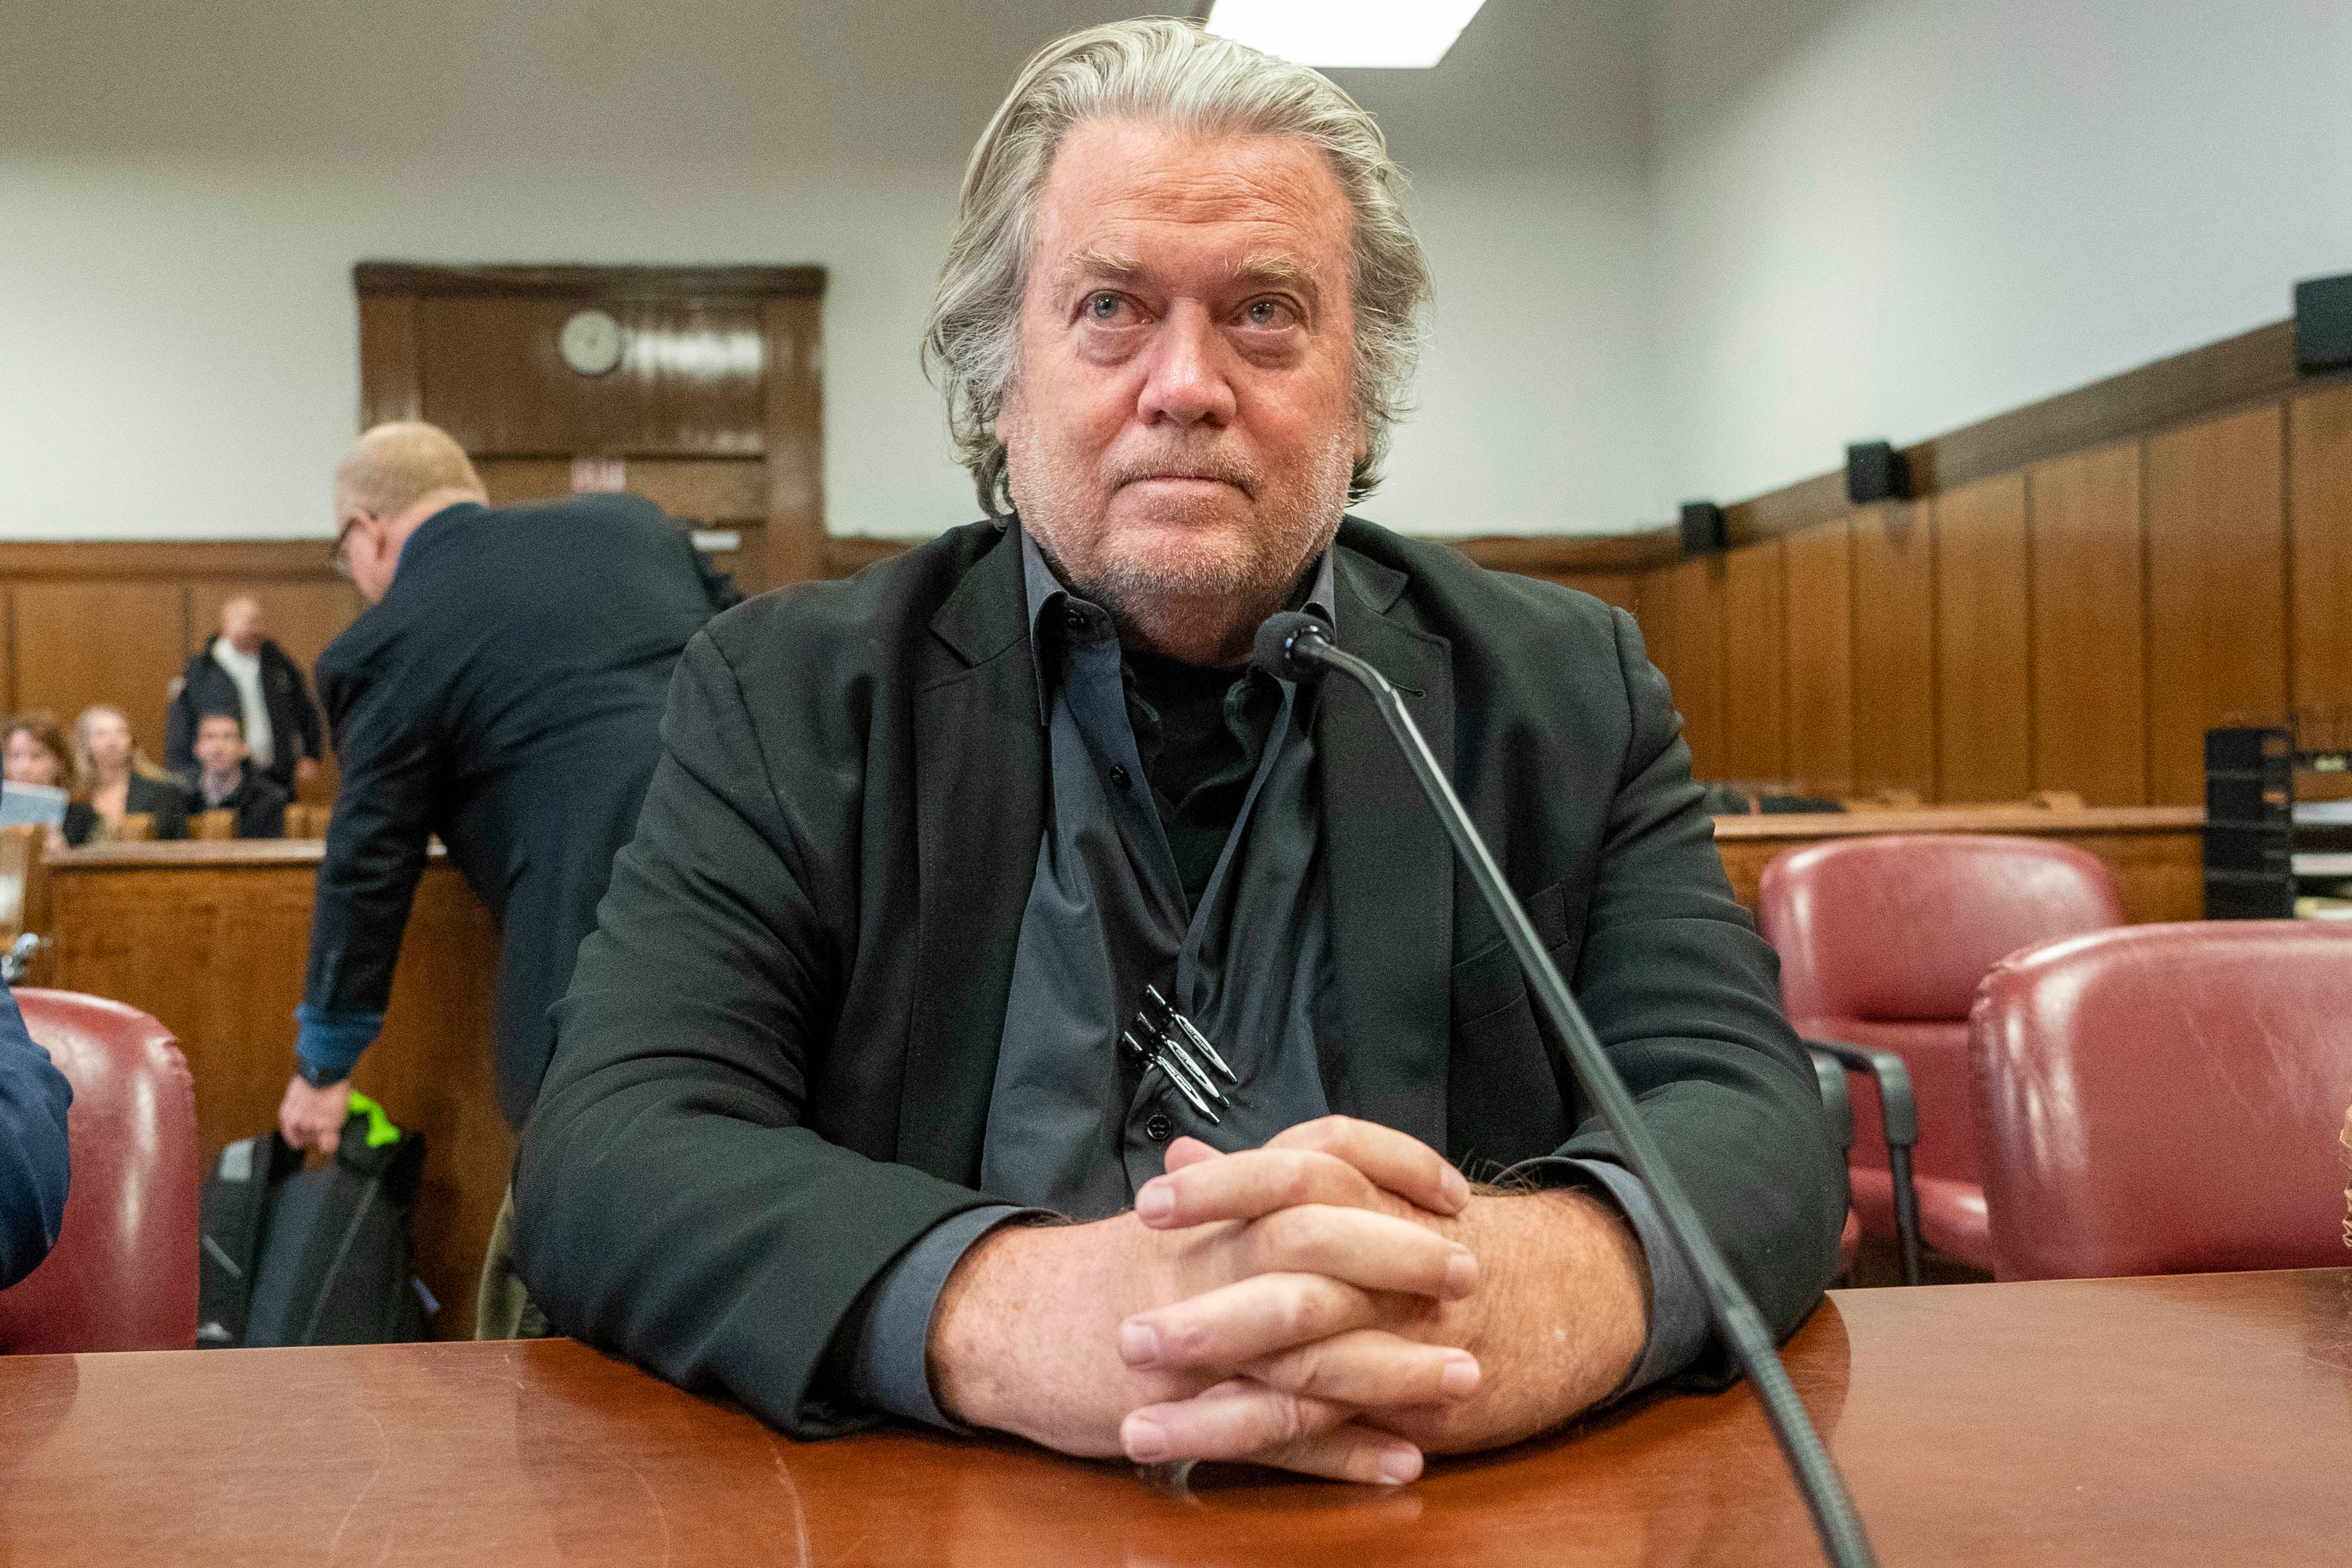 Steve Bannon appearing in court in New York in January 2023. A federal appeals court panel has rejected his bid to stay out of prison while he fights his conviction